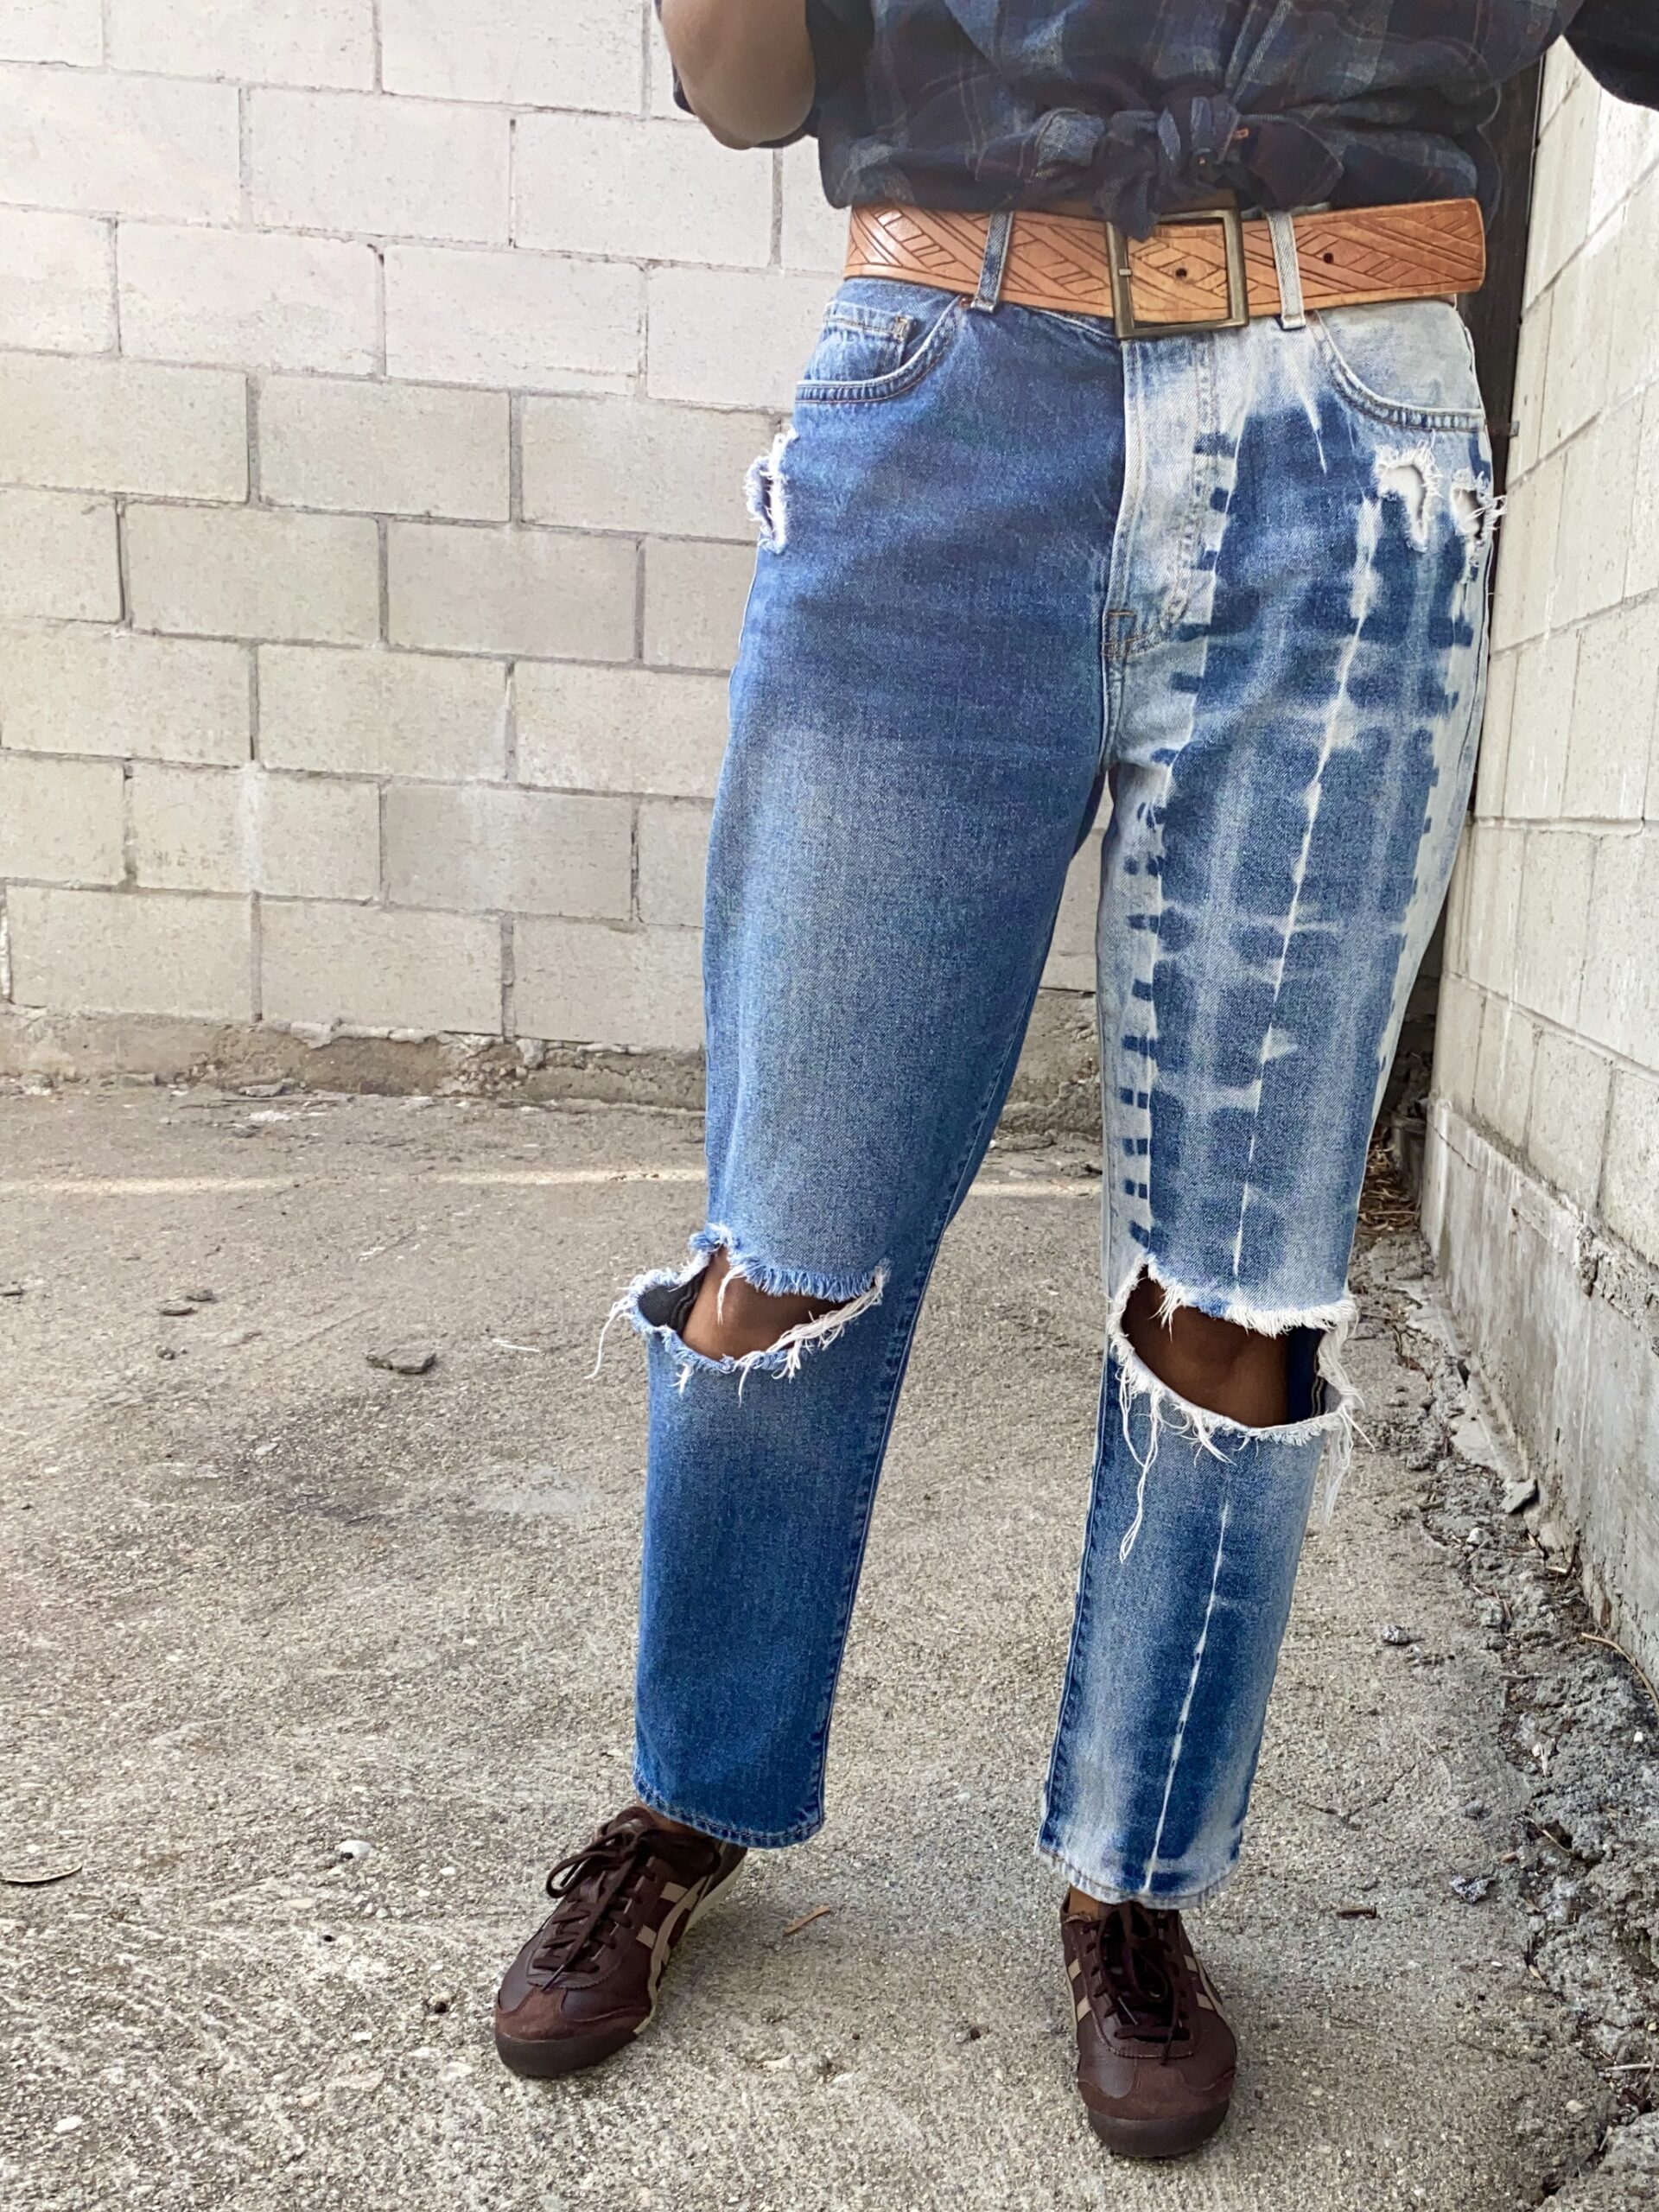 Front side of model wearing distressed blue jeans.